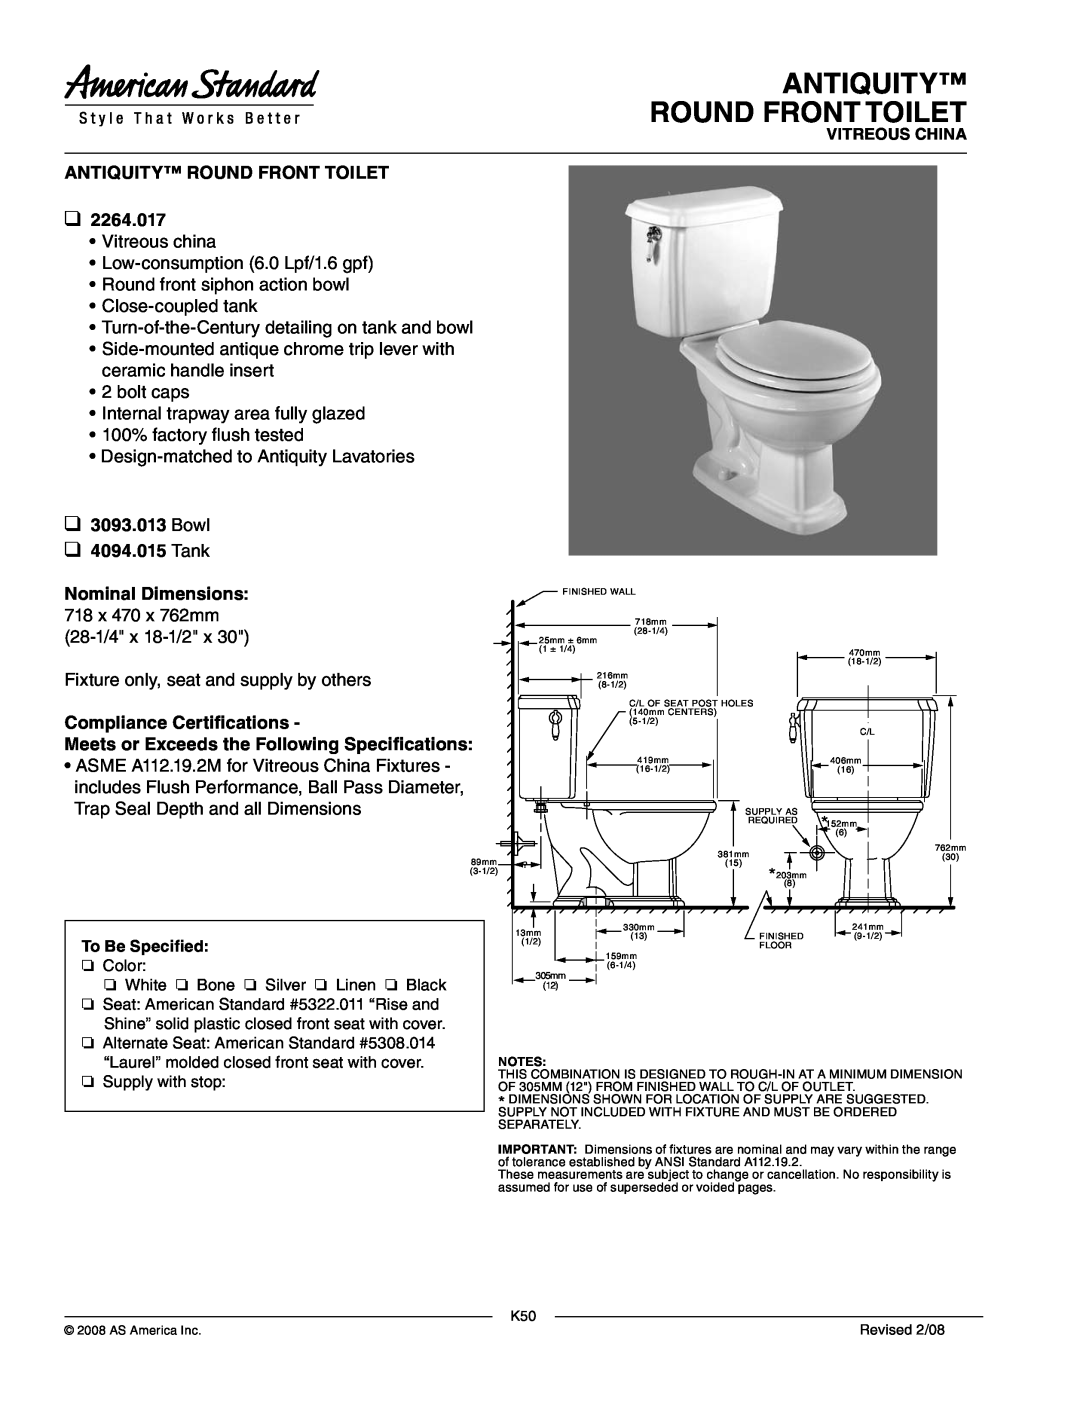 American Standard 3093.013 dimensions Antiquity Round Front Toilet, ANTIQUITY ROUND FRONT TOILET 2264.017 